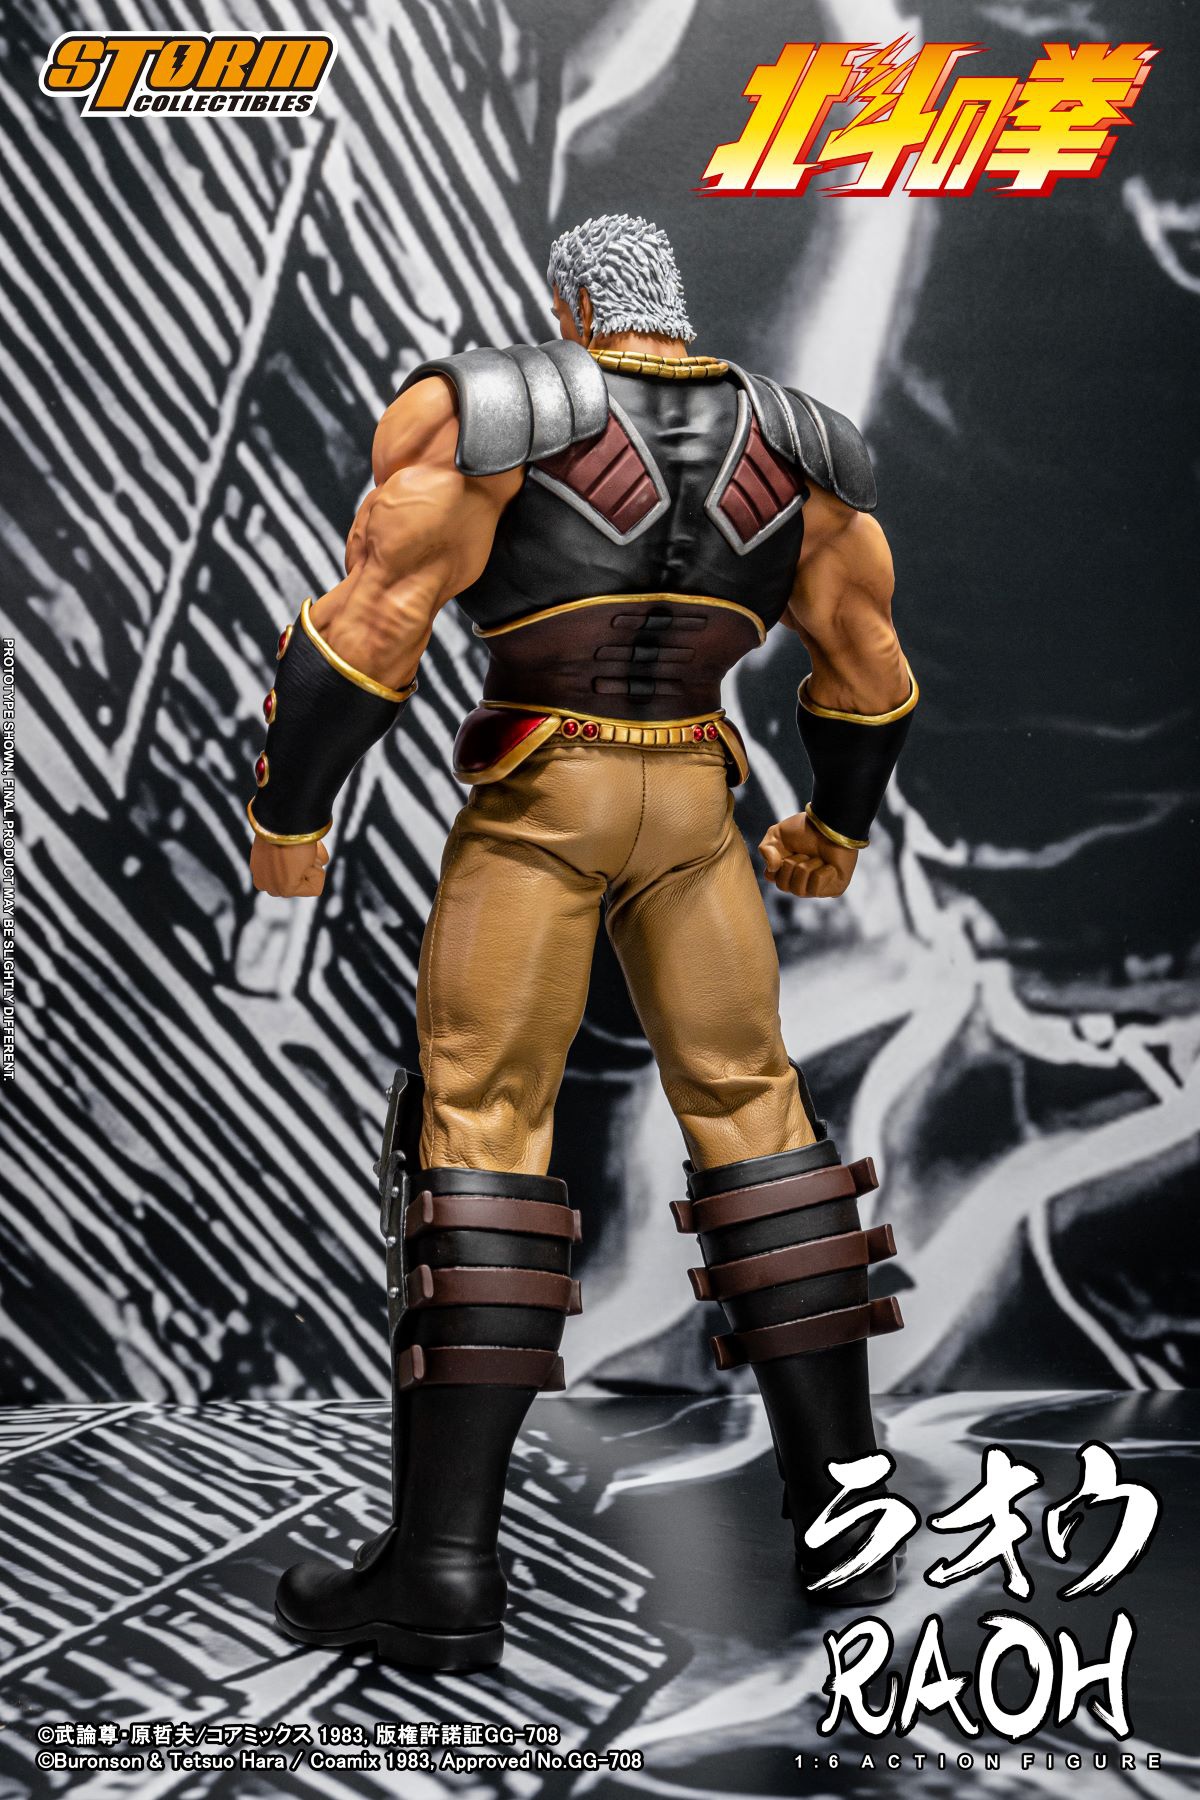 HokutoNoKen - NEW PRODUCT: Storm Collectibles - "Fist of the North Star" RAOH 04139